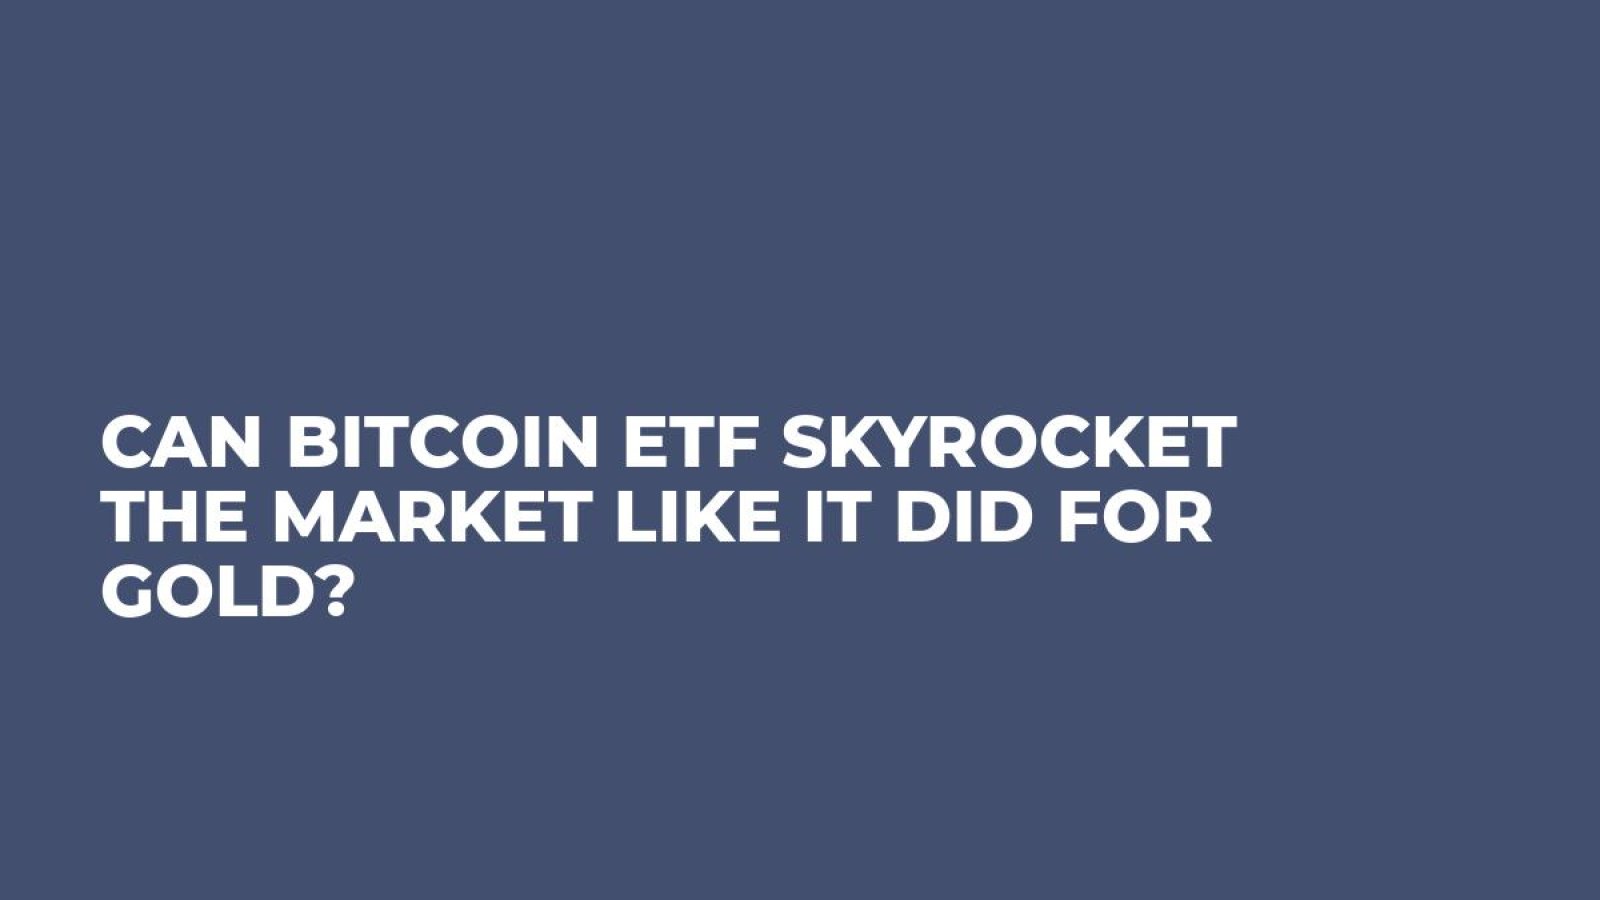 Can Bitcoin ETF Skyrocket the Market Like It Did For Gold?